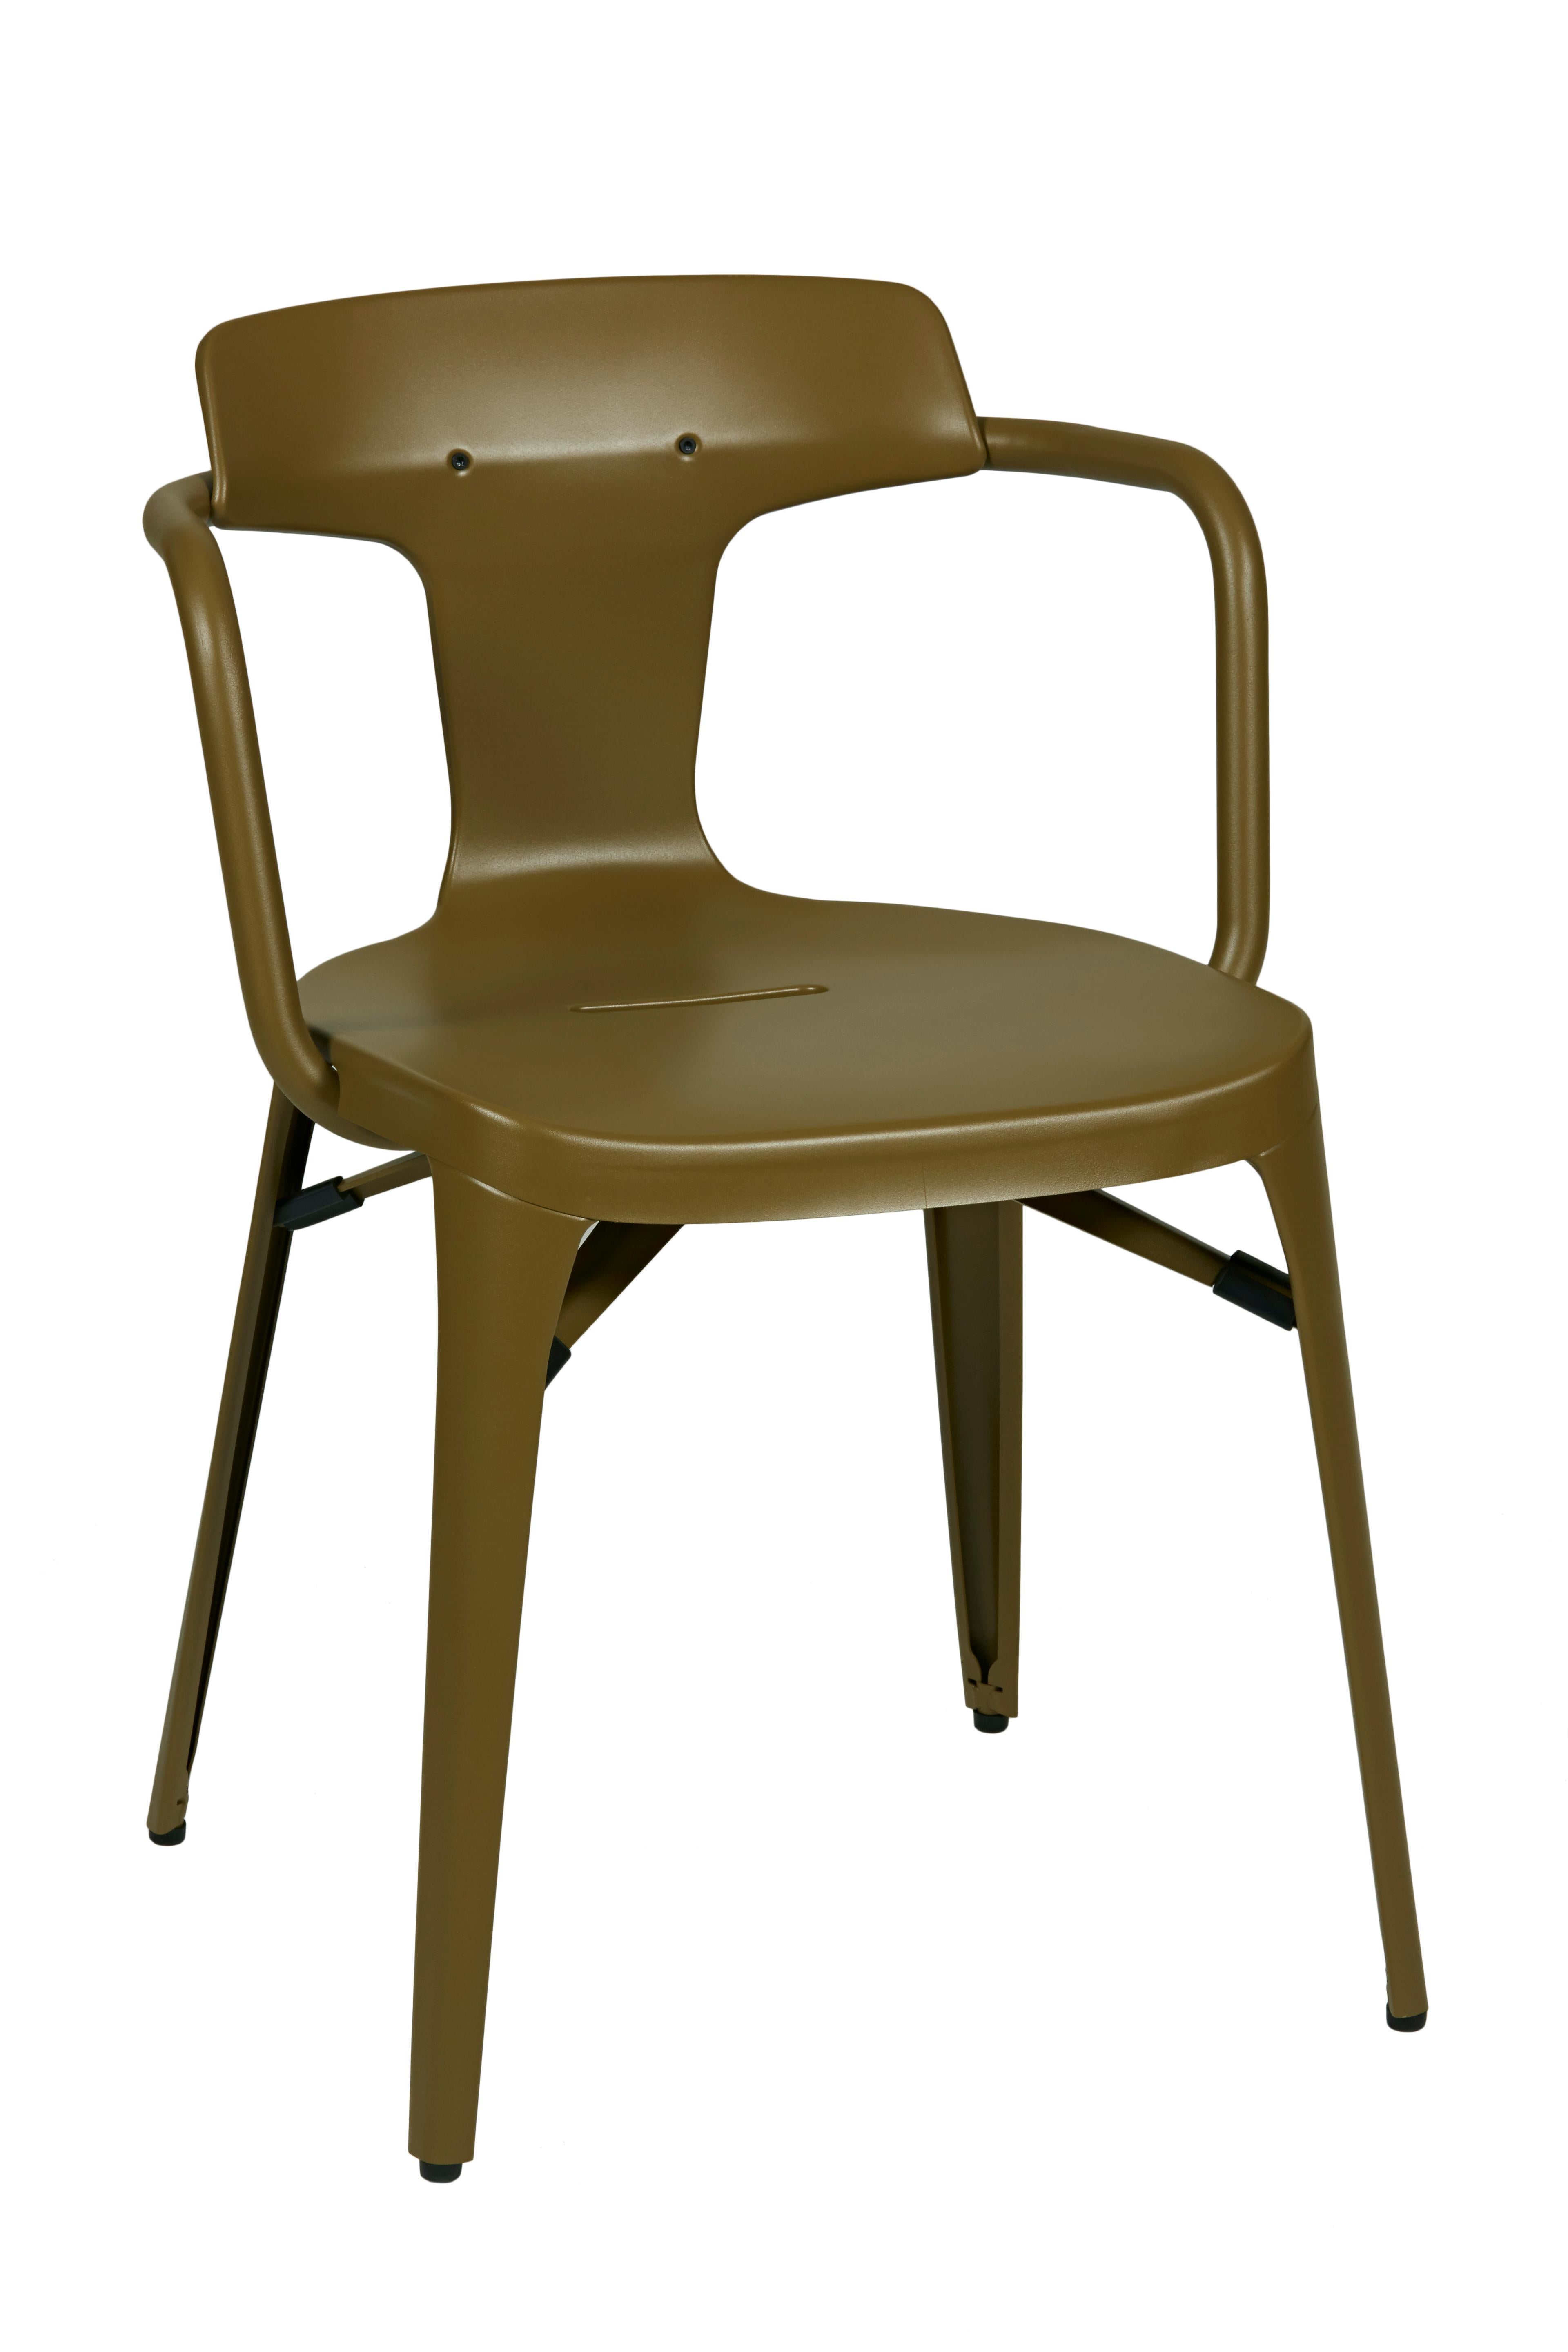 Im Angebot: T14 Chair in Pop Colors by Patrick Norguet and Tolix, Brown (Kaki) 3